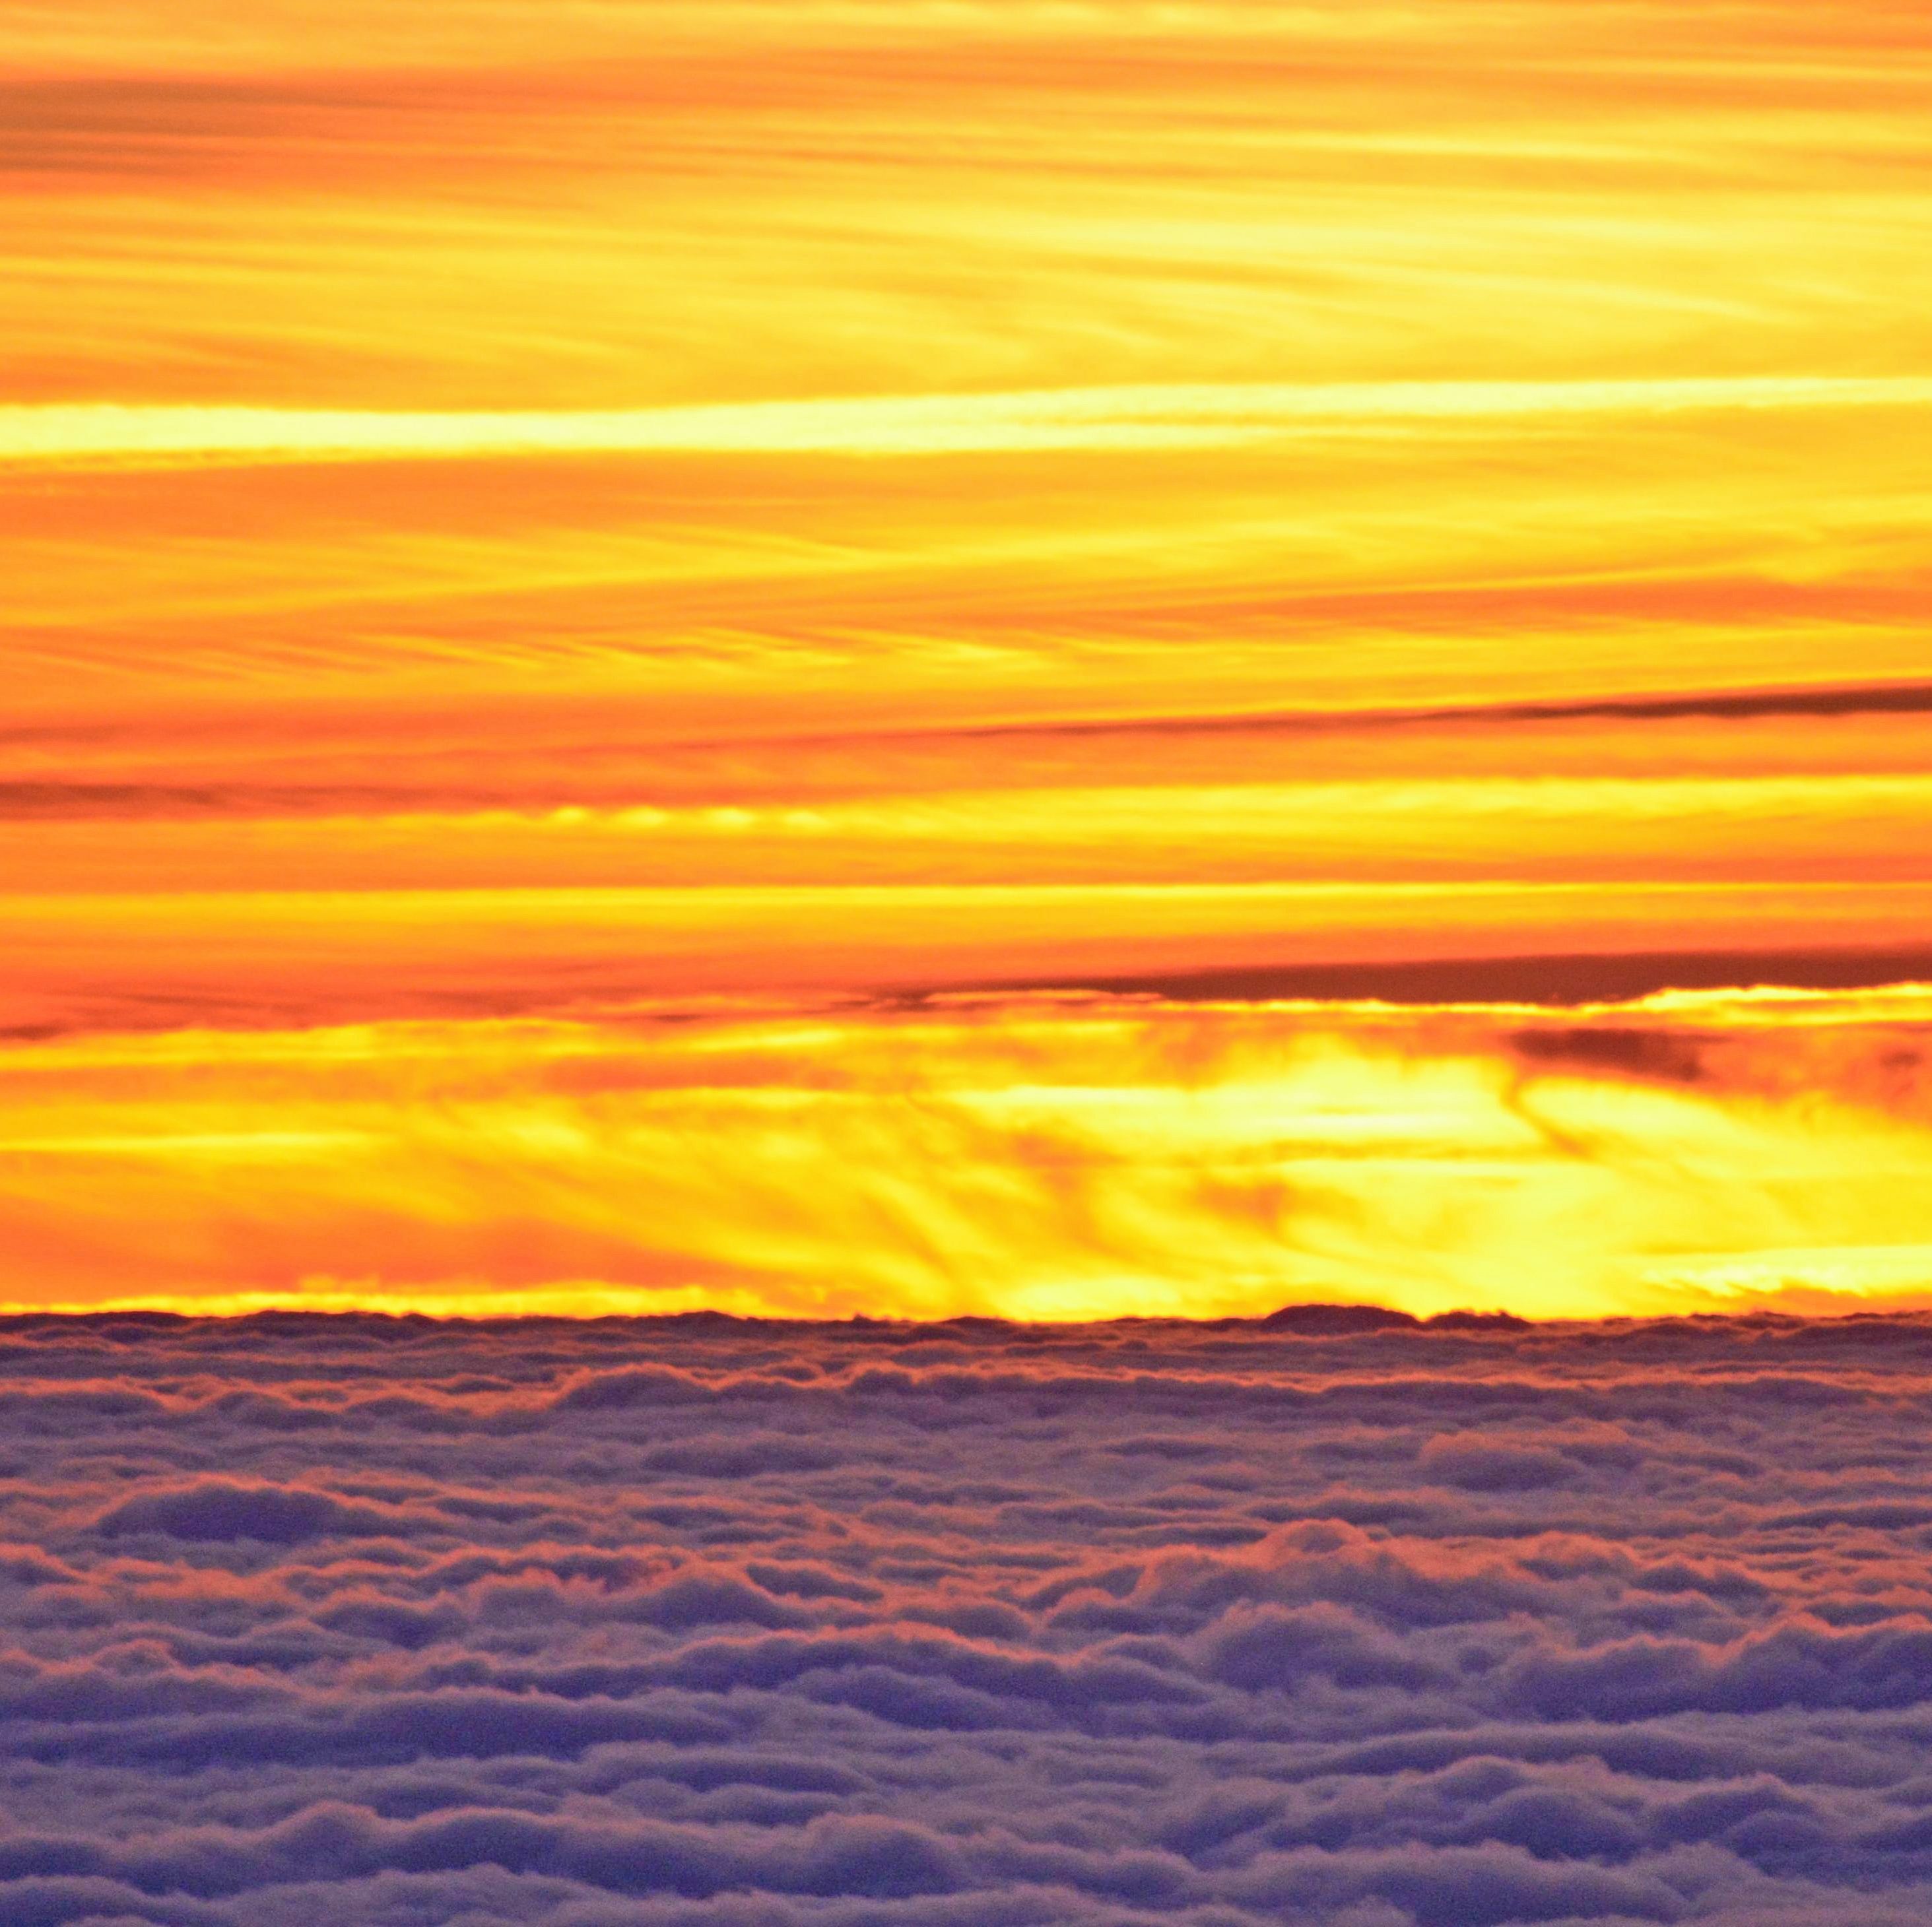 A fiery sky at sunset, taken from above the cloud line.